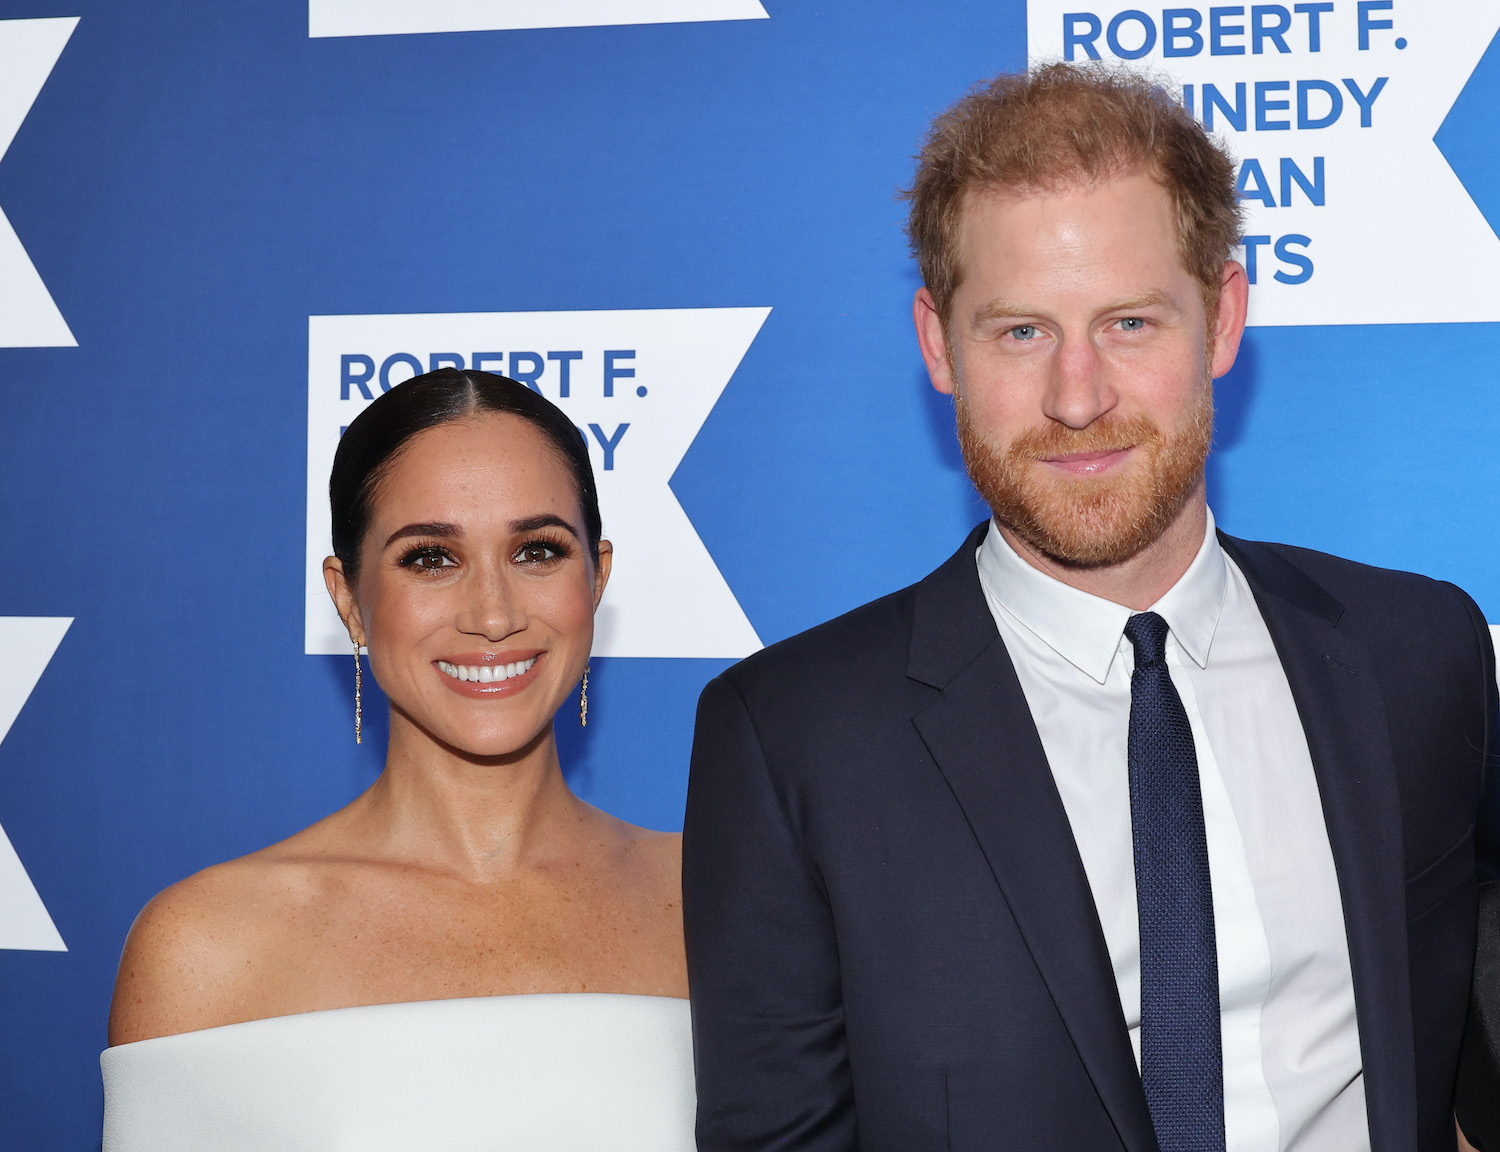 Body Language Expert Points Out Prince Harry’s ‘Discomfort’ During Meghan Markle Mock Curtsy Moment in Netflix Documentary